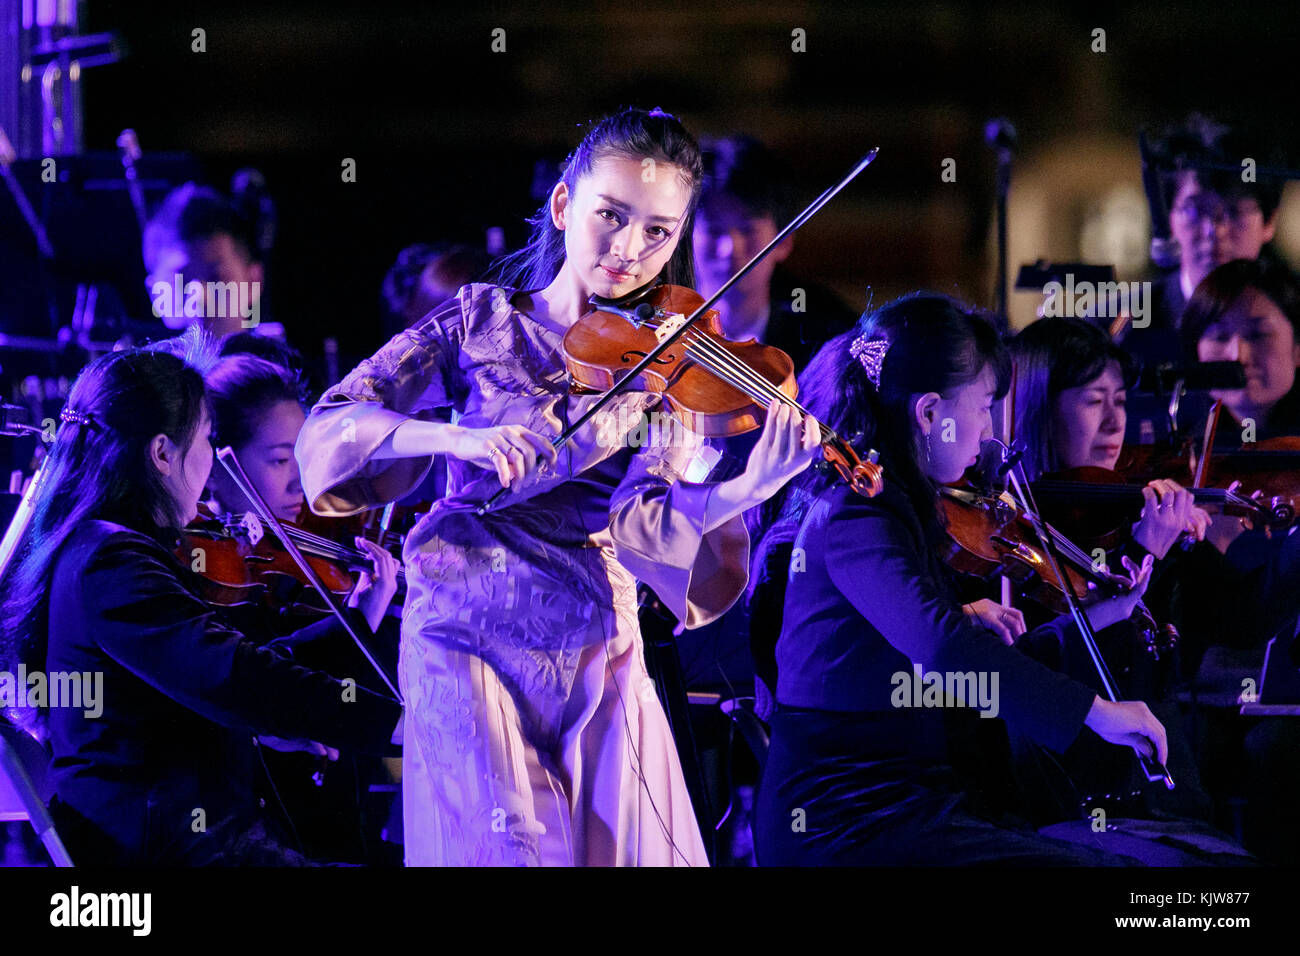 Tokyo, Japan. 26th Nov, 2017. Japanese violinist Emiri Miyamoto performs during the 1000 Days to Go! cultural event in front of Tokyo Station on November 26, 2017, Tokyo, Japan. Japanese celebrities attended the event marking the 1000-day countdown to the 2020 Tokyo Olympics. Credit: Rodrigo Reyes Marin/AFLO/Alamy Live News Credit: Aflo Co. Ltd./Alamy Live News Stock Photo